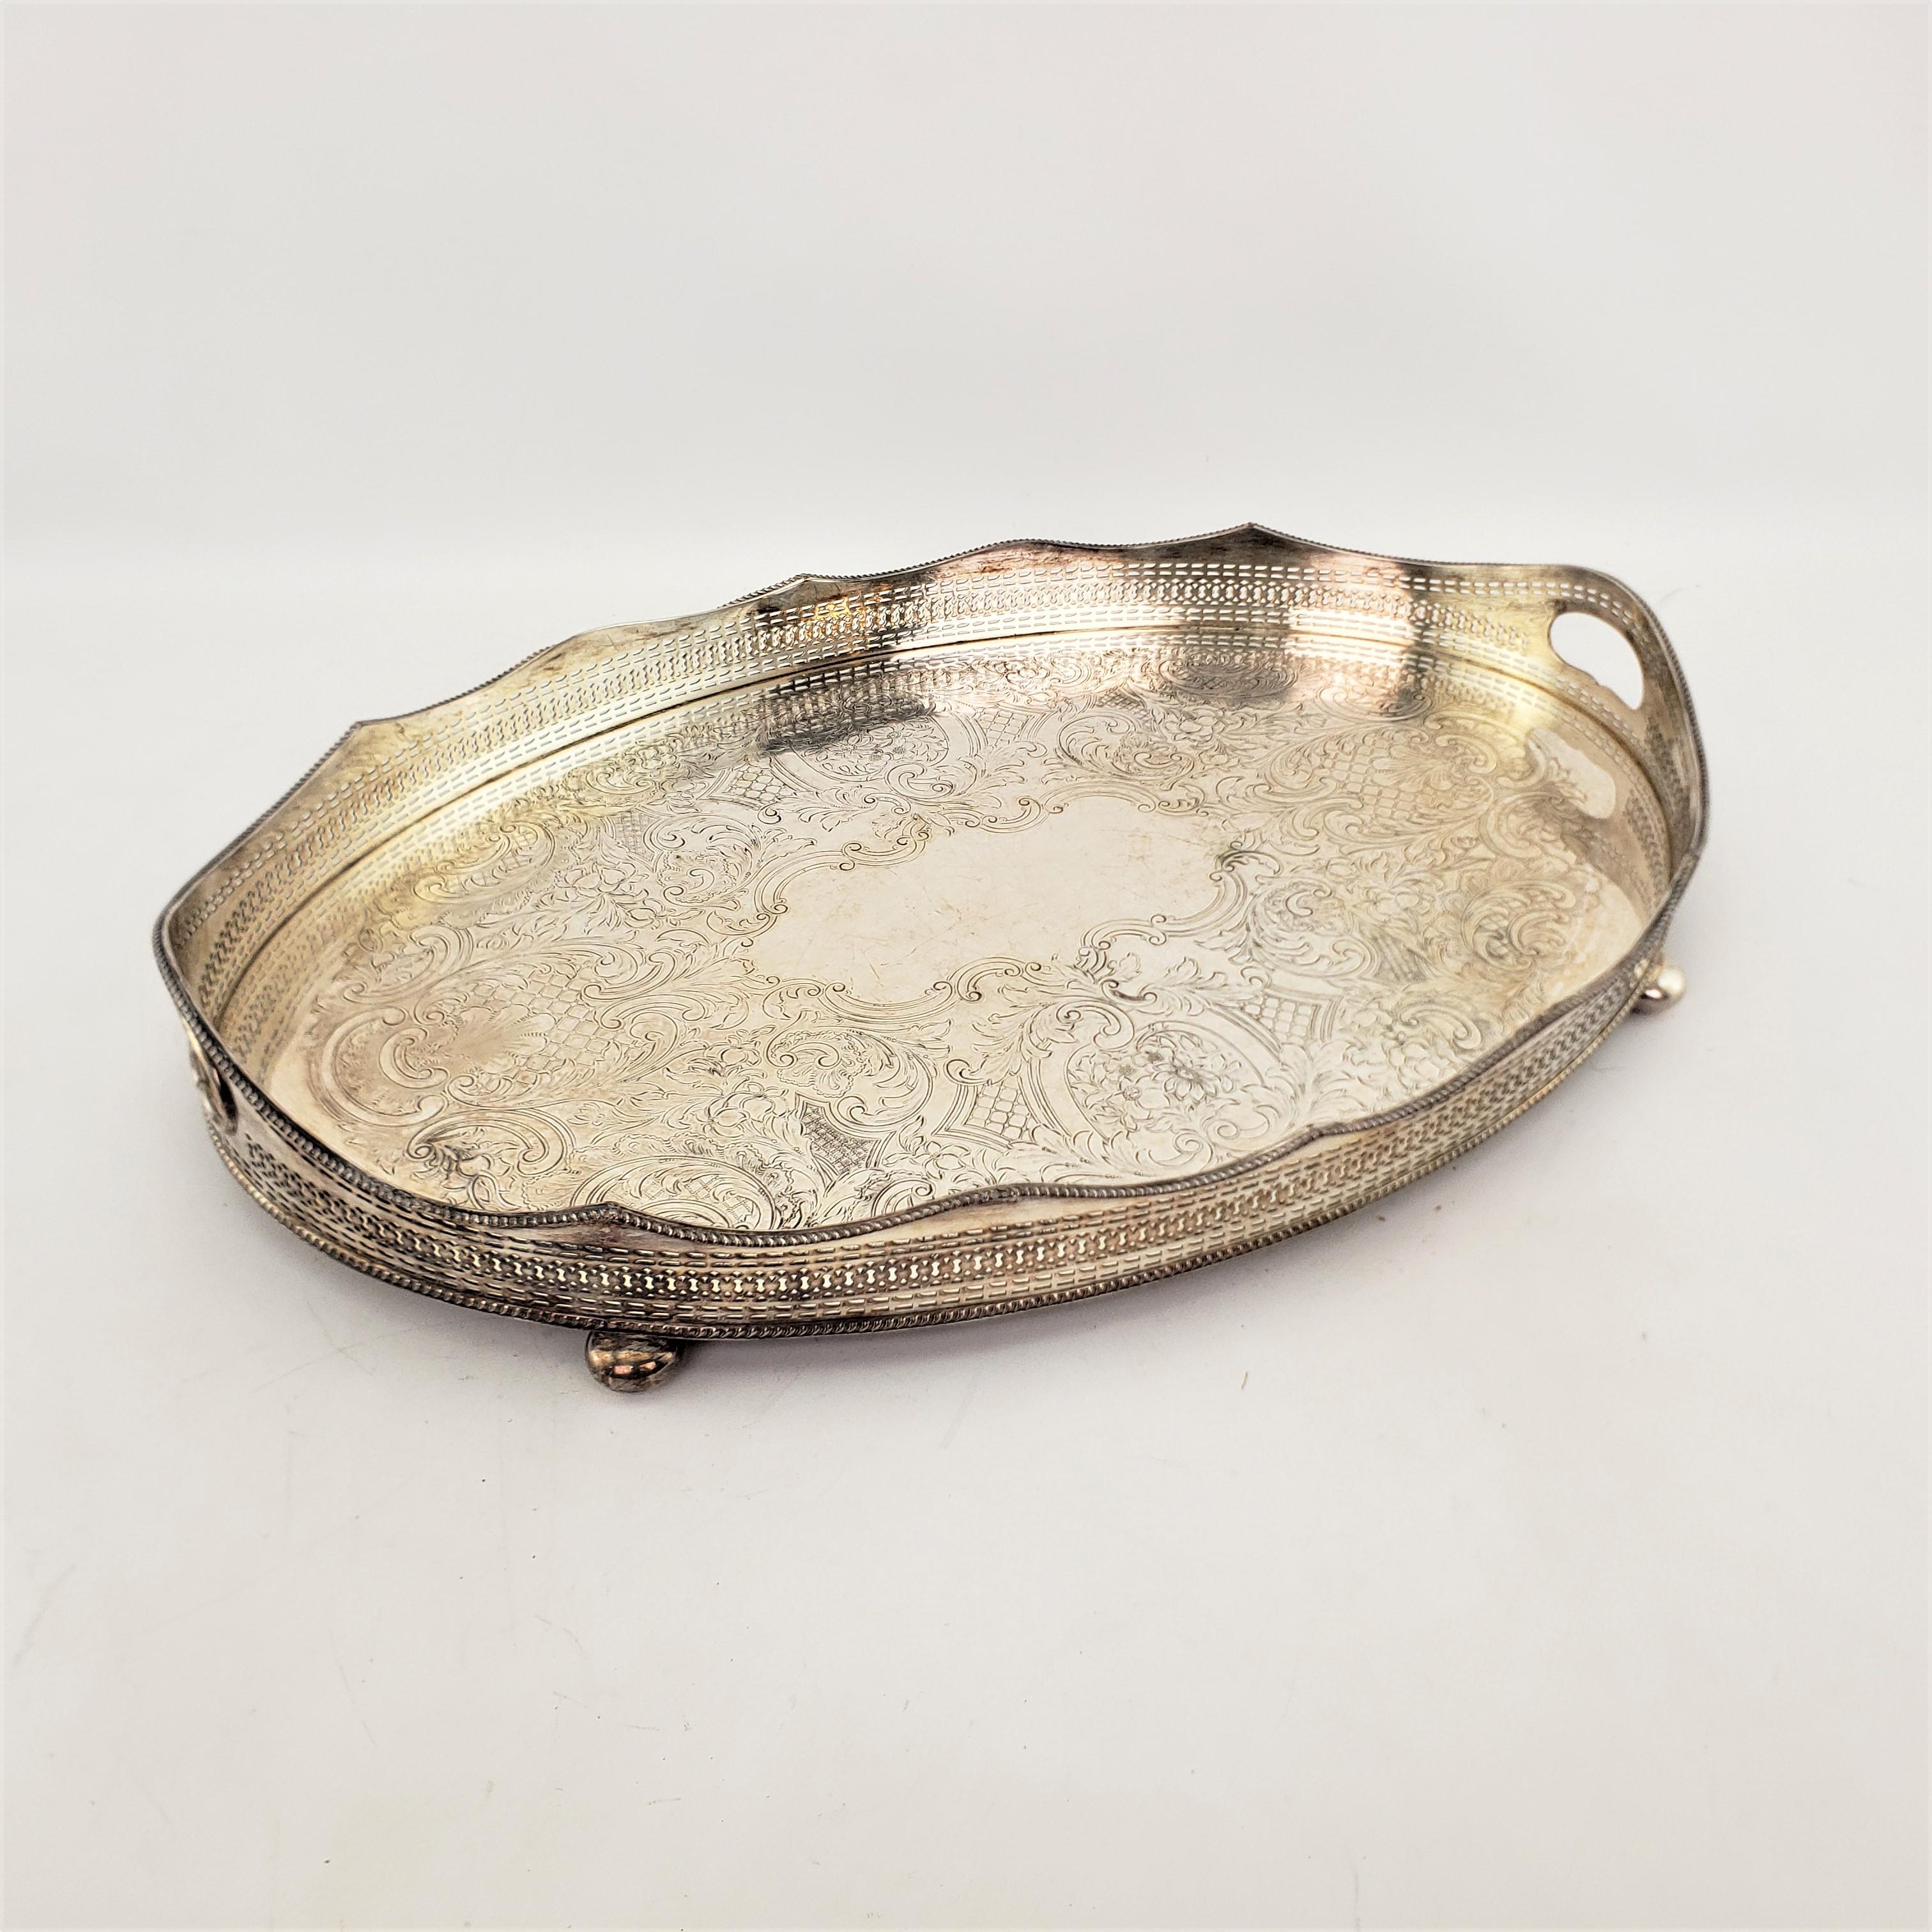 This antique silver plated serving tray was made by the well known Barker-Ellis Silver Co. of England in approximately 1920 in a Victorian style. The tray is composed of silver plate over copper and has a high pierced gallery with inset handles on